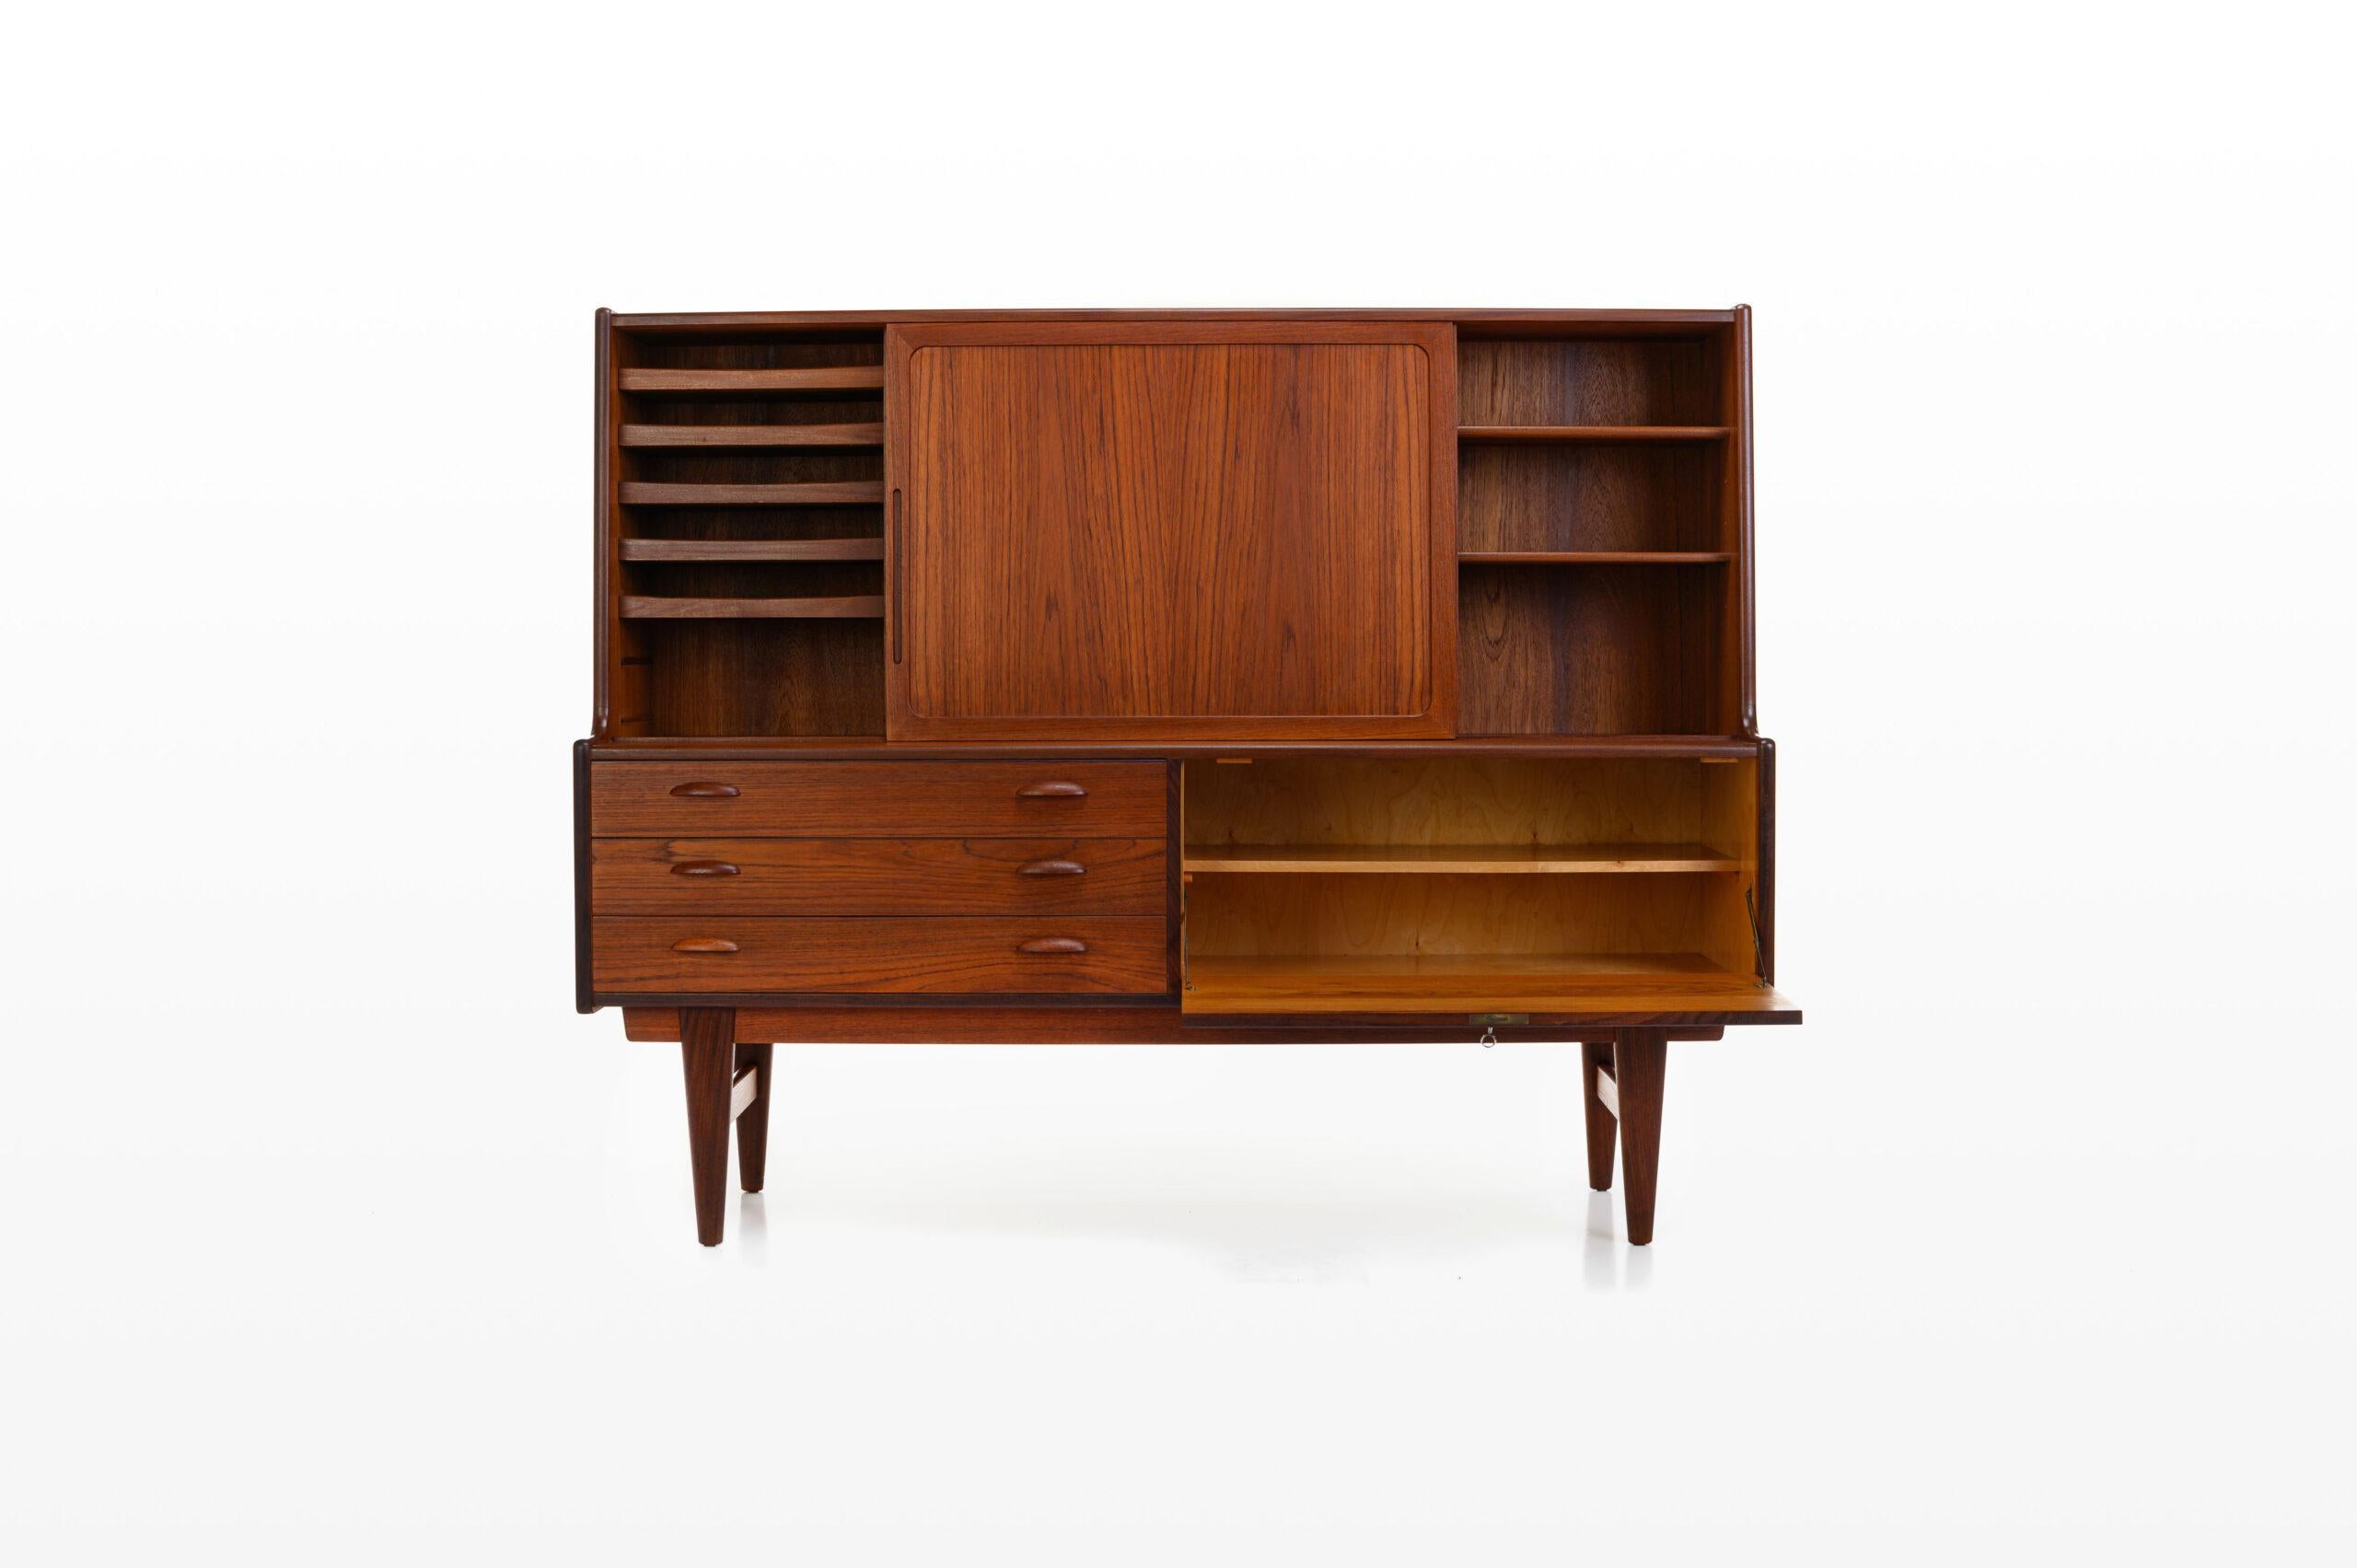 Vintage teak sideboard produced in Finland by A. Ahlstrom Osakeyhtio Warkaus . The sideboard has four sliding doors, elegant handles and an integrated bar area. The sideboard is in beautiful vintage condition.
 